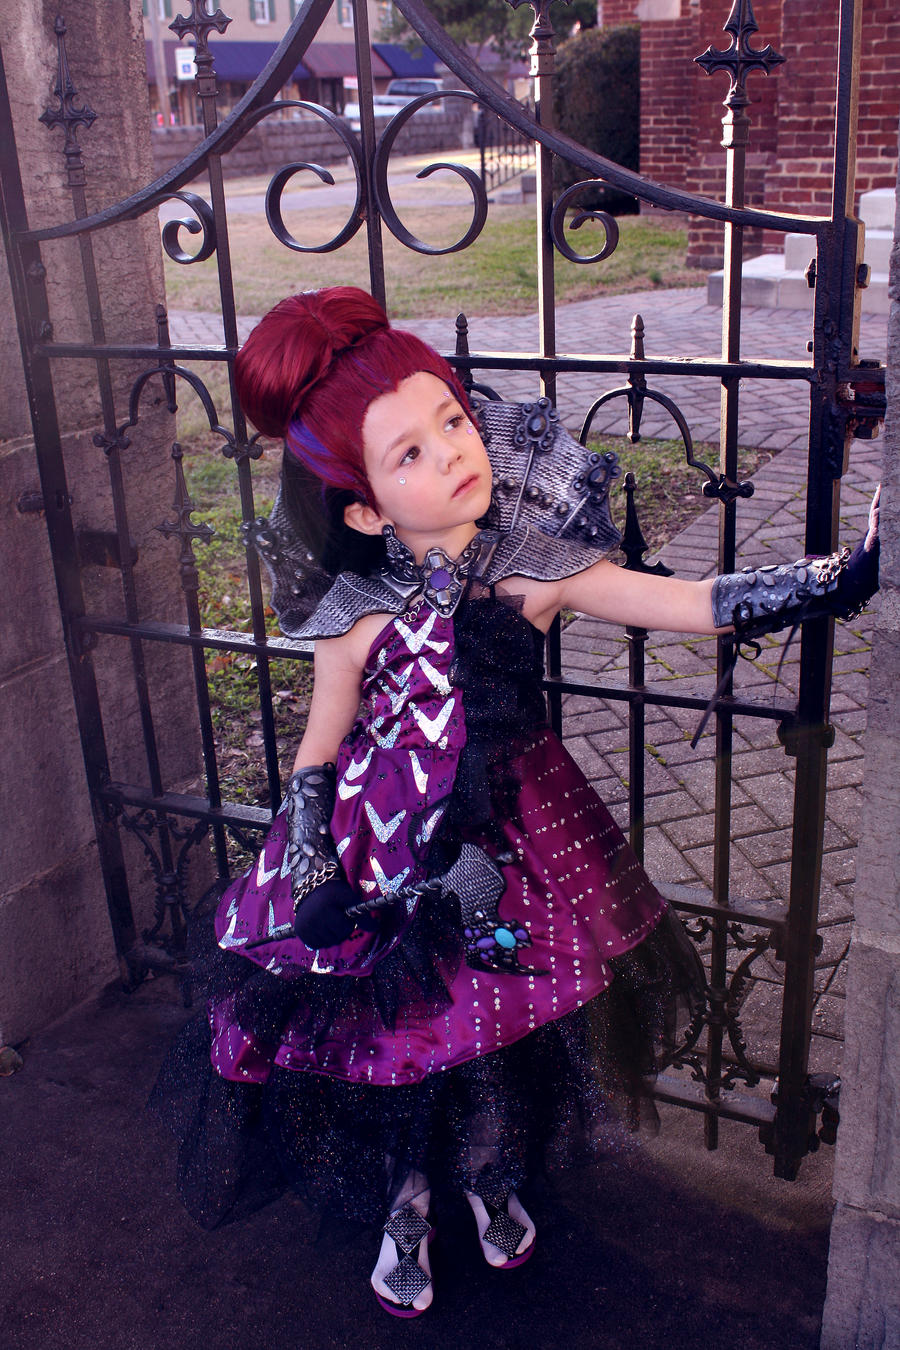 Ever After High Thronecoming Raven Queen